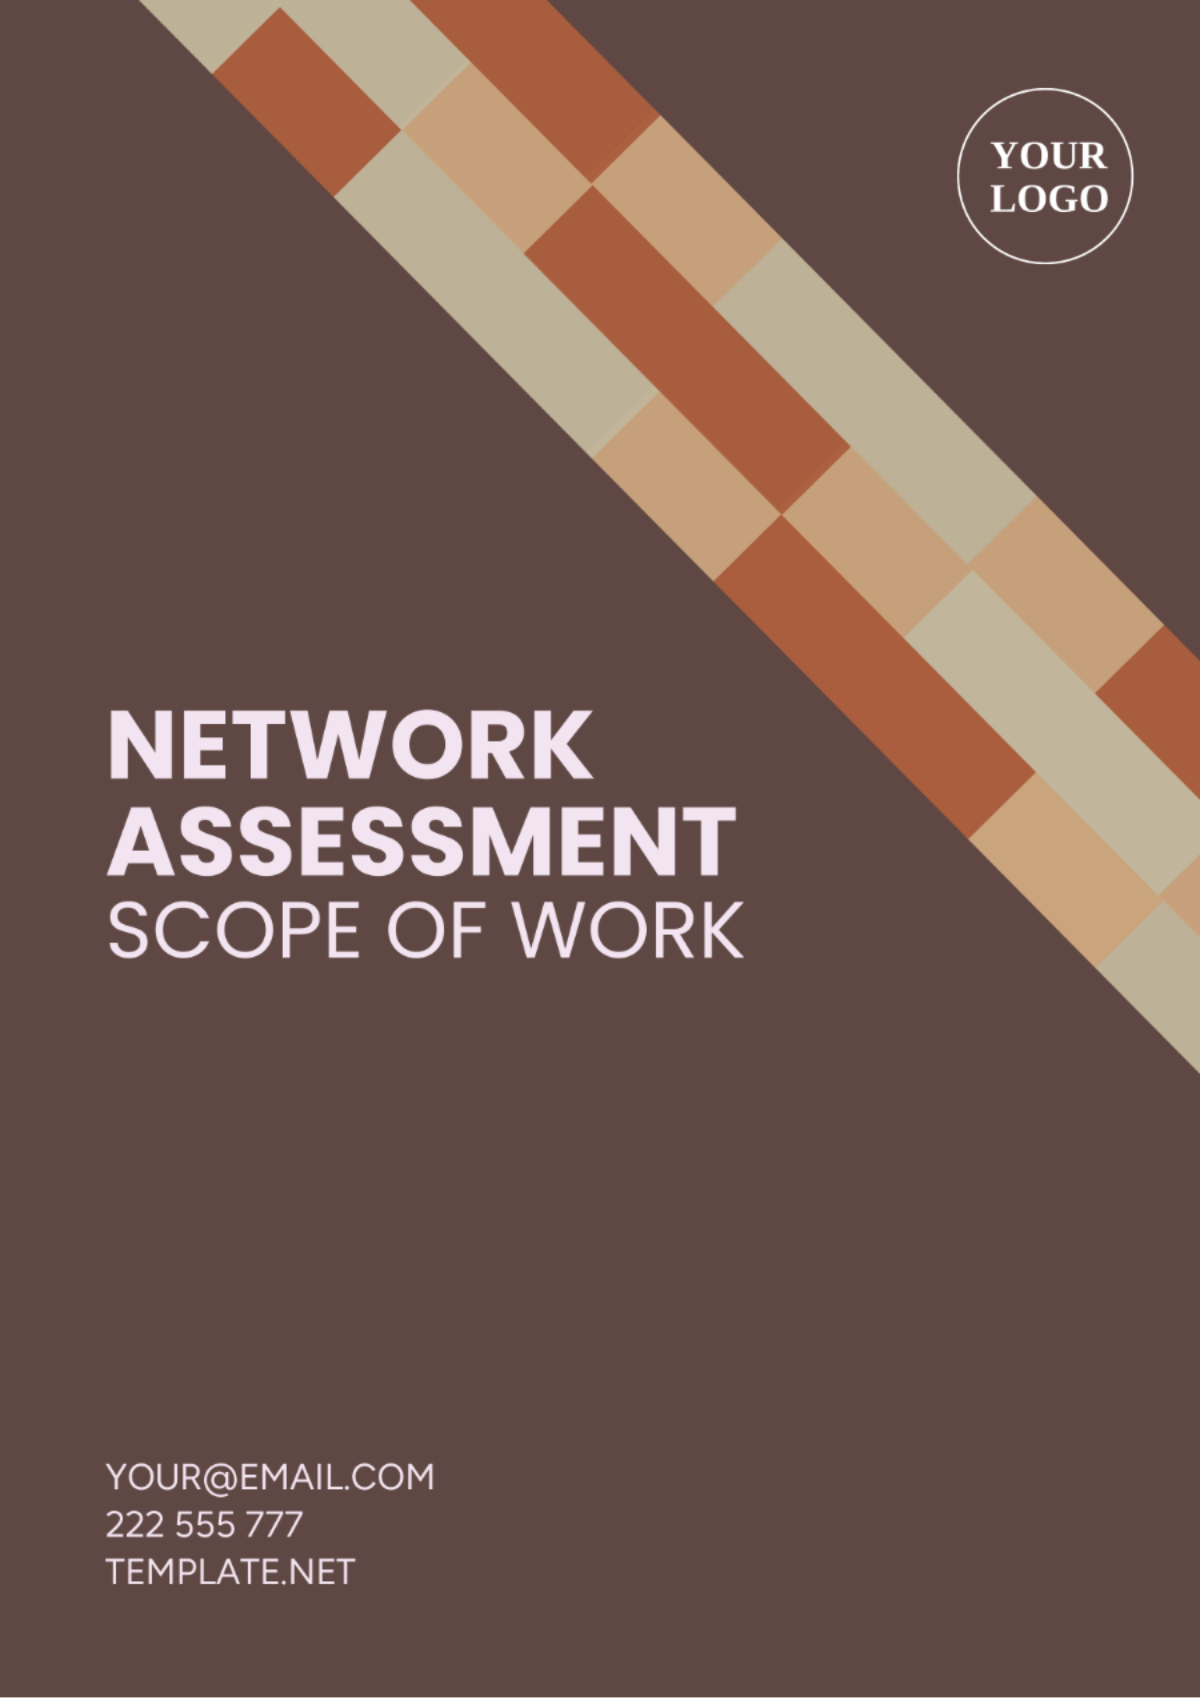 Network Assessment Scope of Work Template